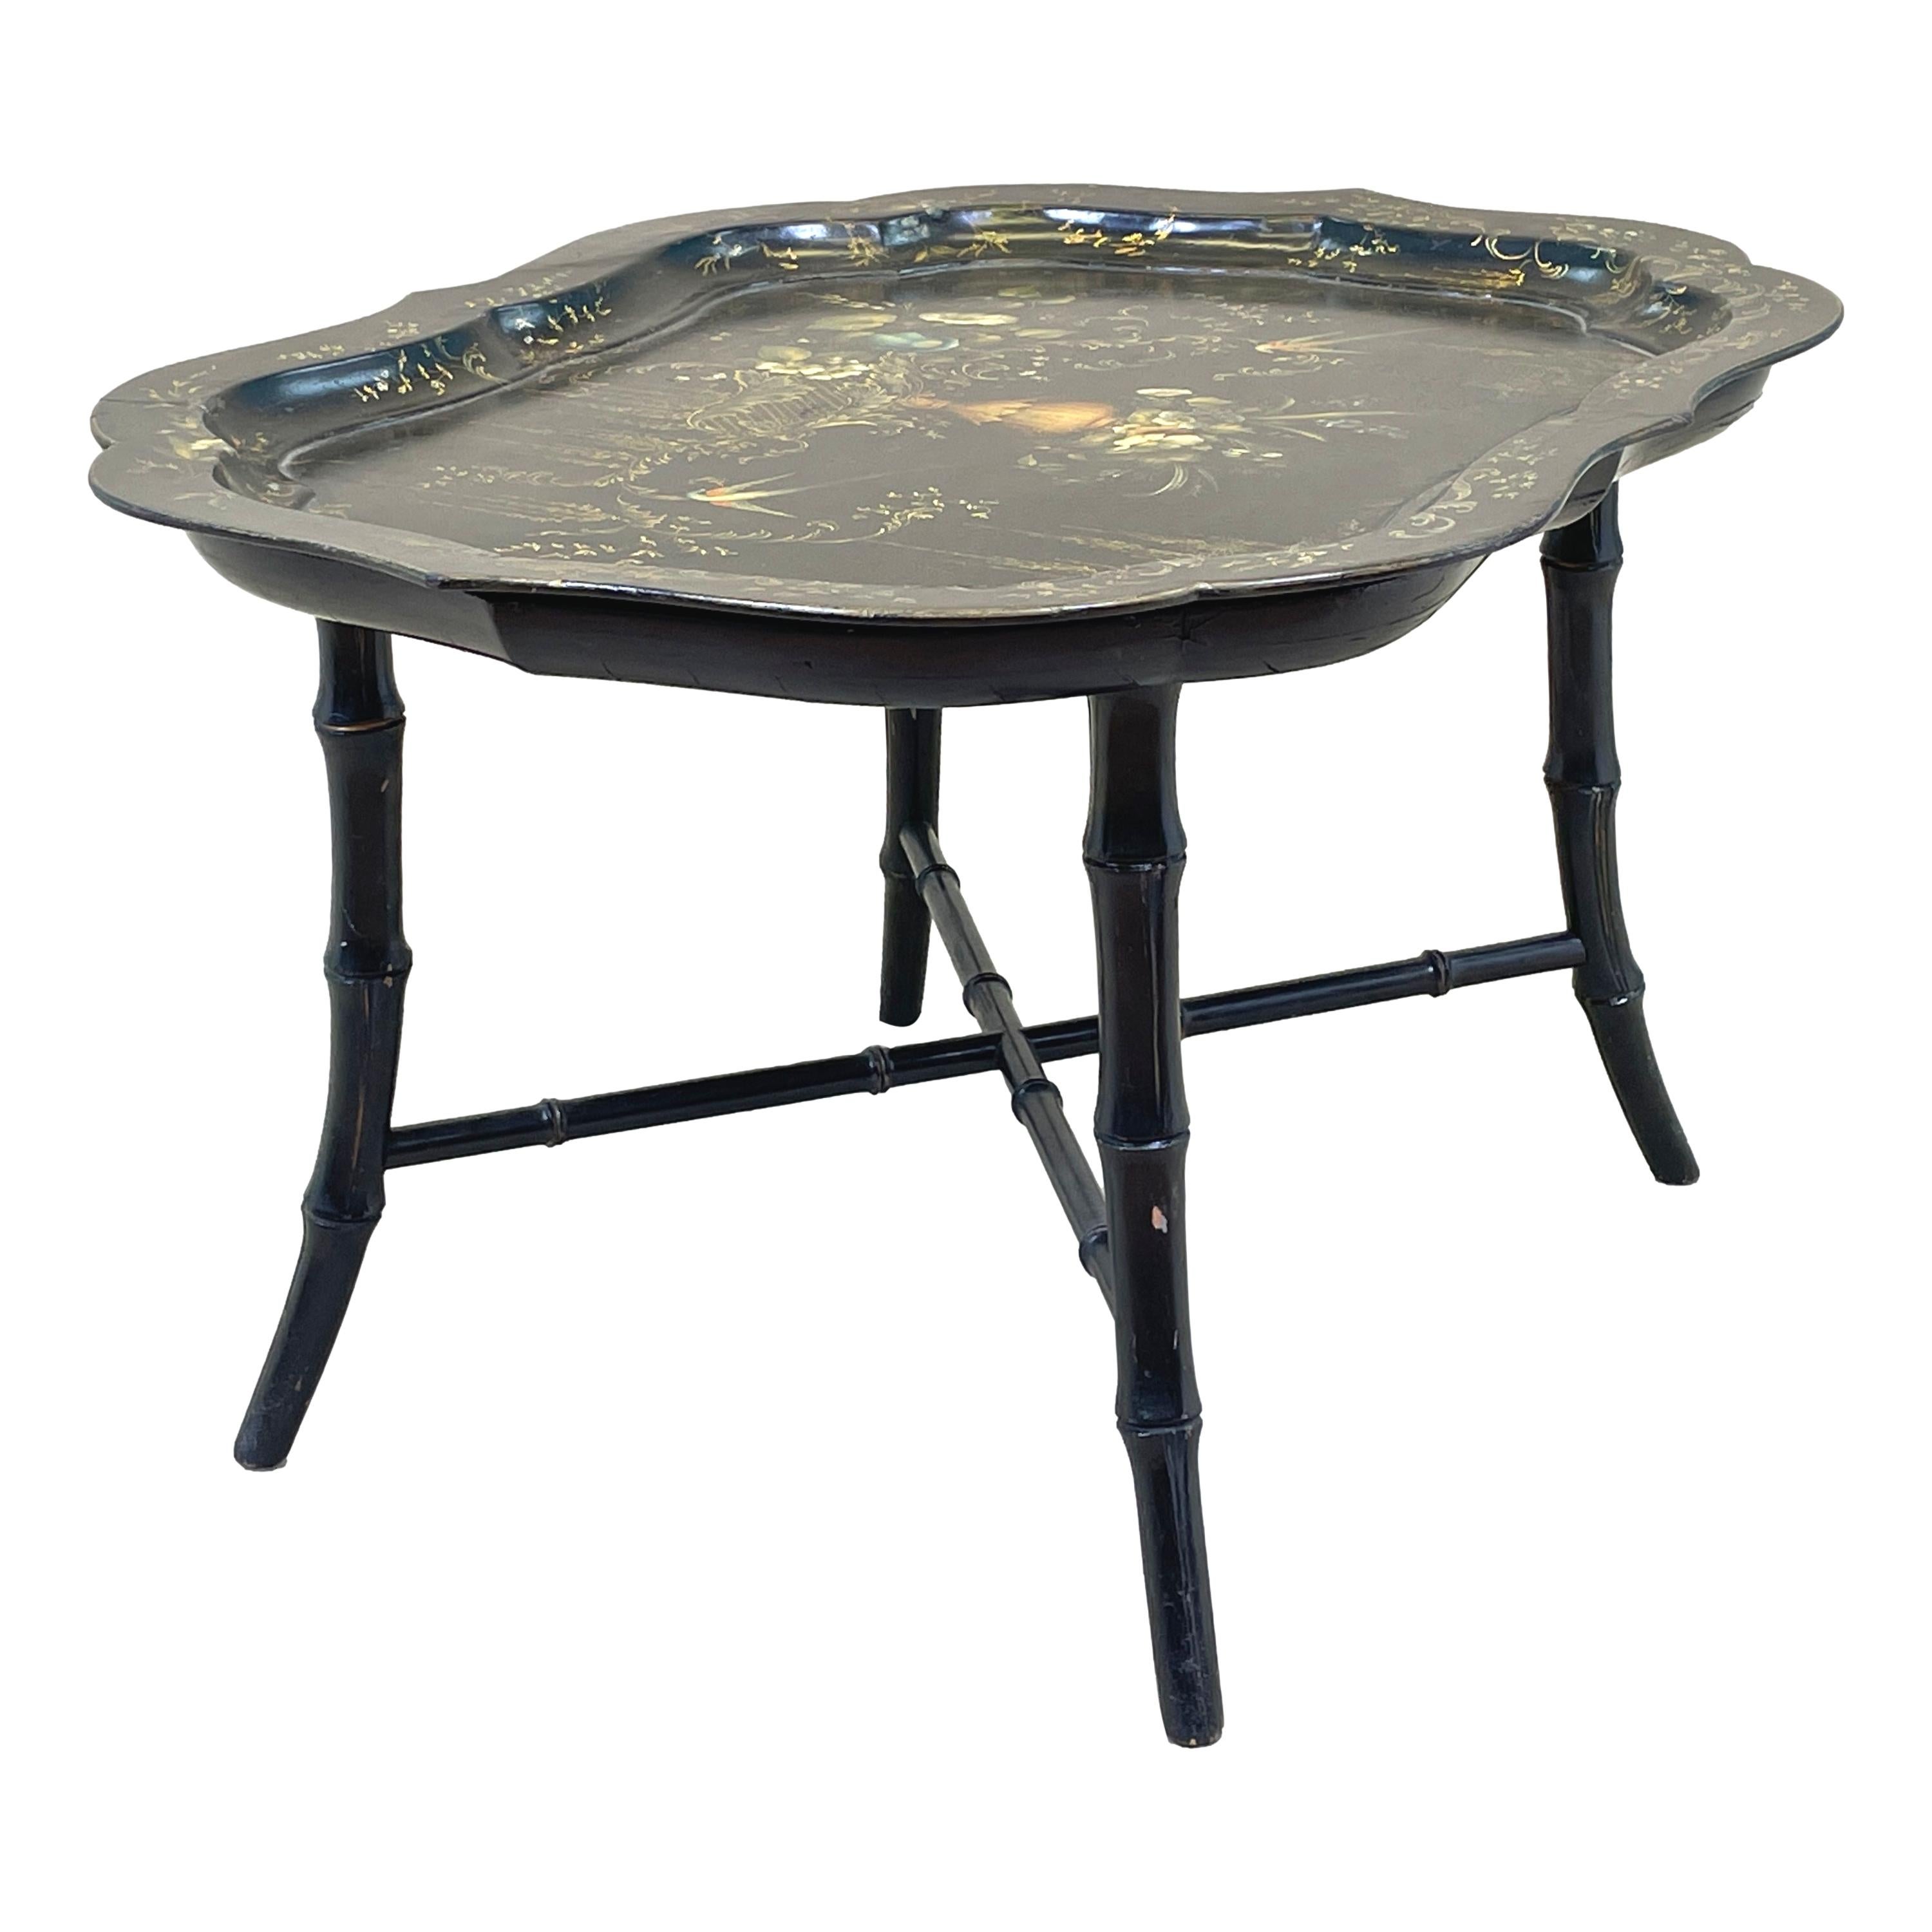 A very good quality mid 19th century papier mache tray on stand, or coffee table, having extremely attractive hand painted and gilded decoration to try top with elegant shaped edge, raised on later bamboo effect tapered leg stand.

What better way